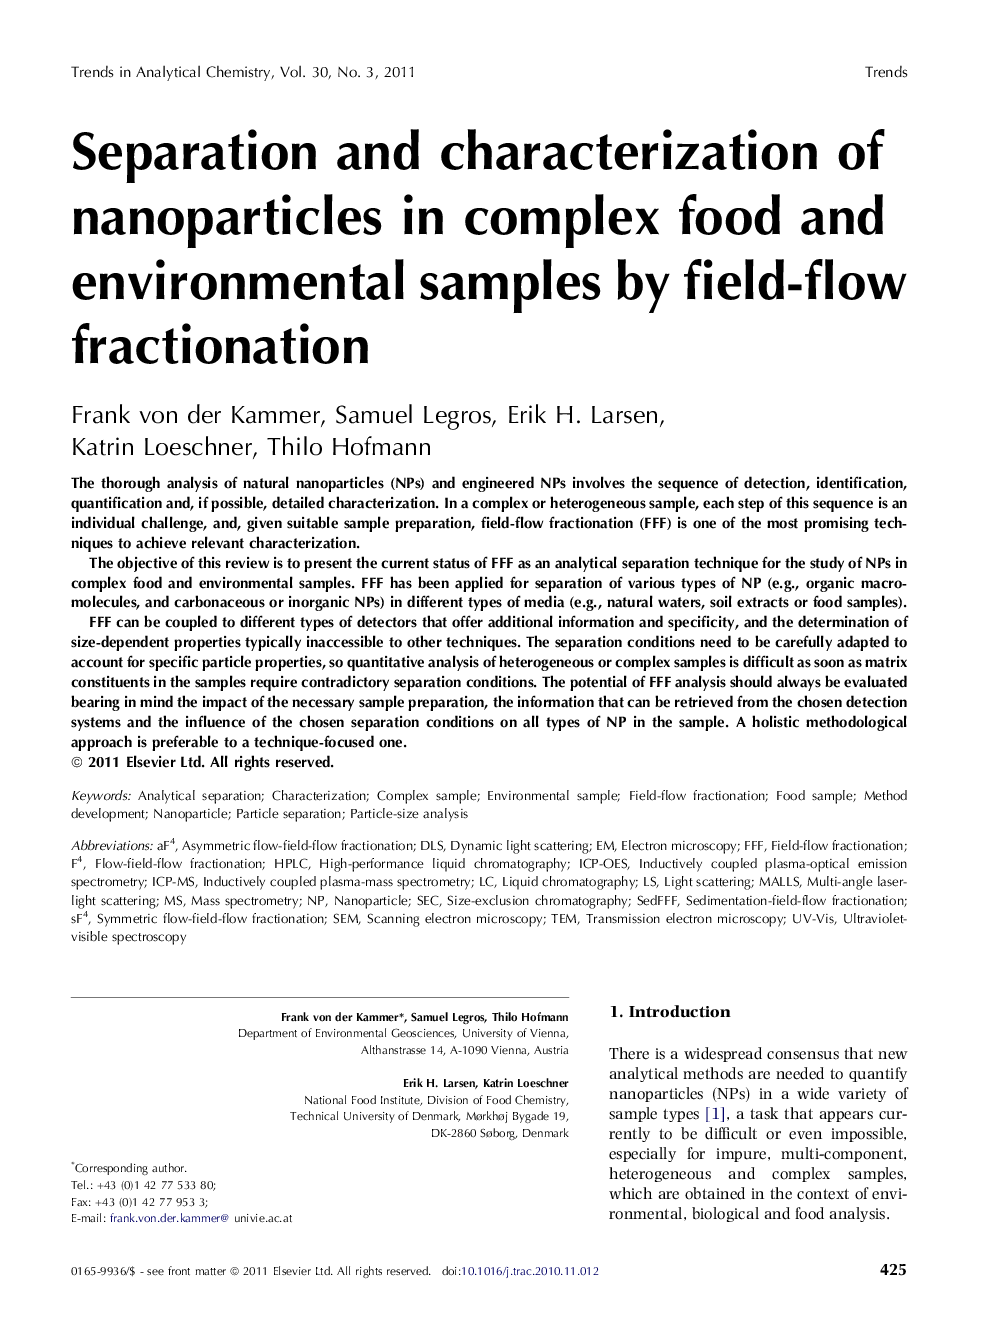 Separation and characterization of nanoparticles in complex food and environmental samples by field-flow fractionation